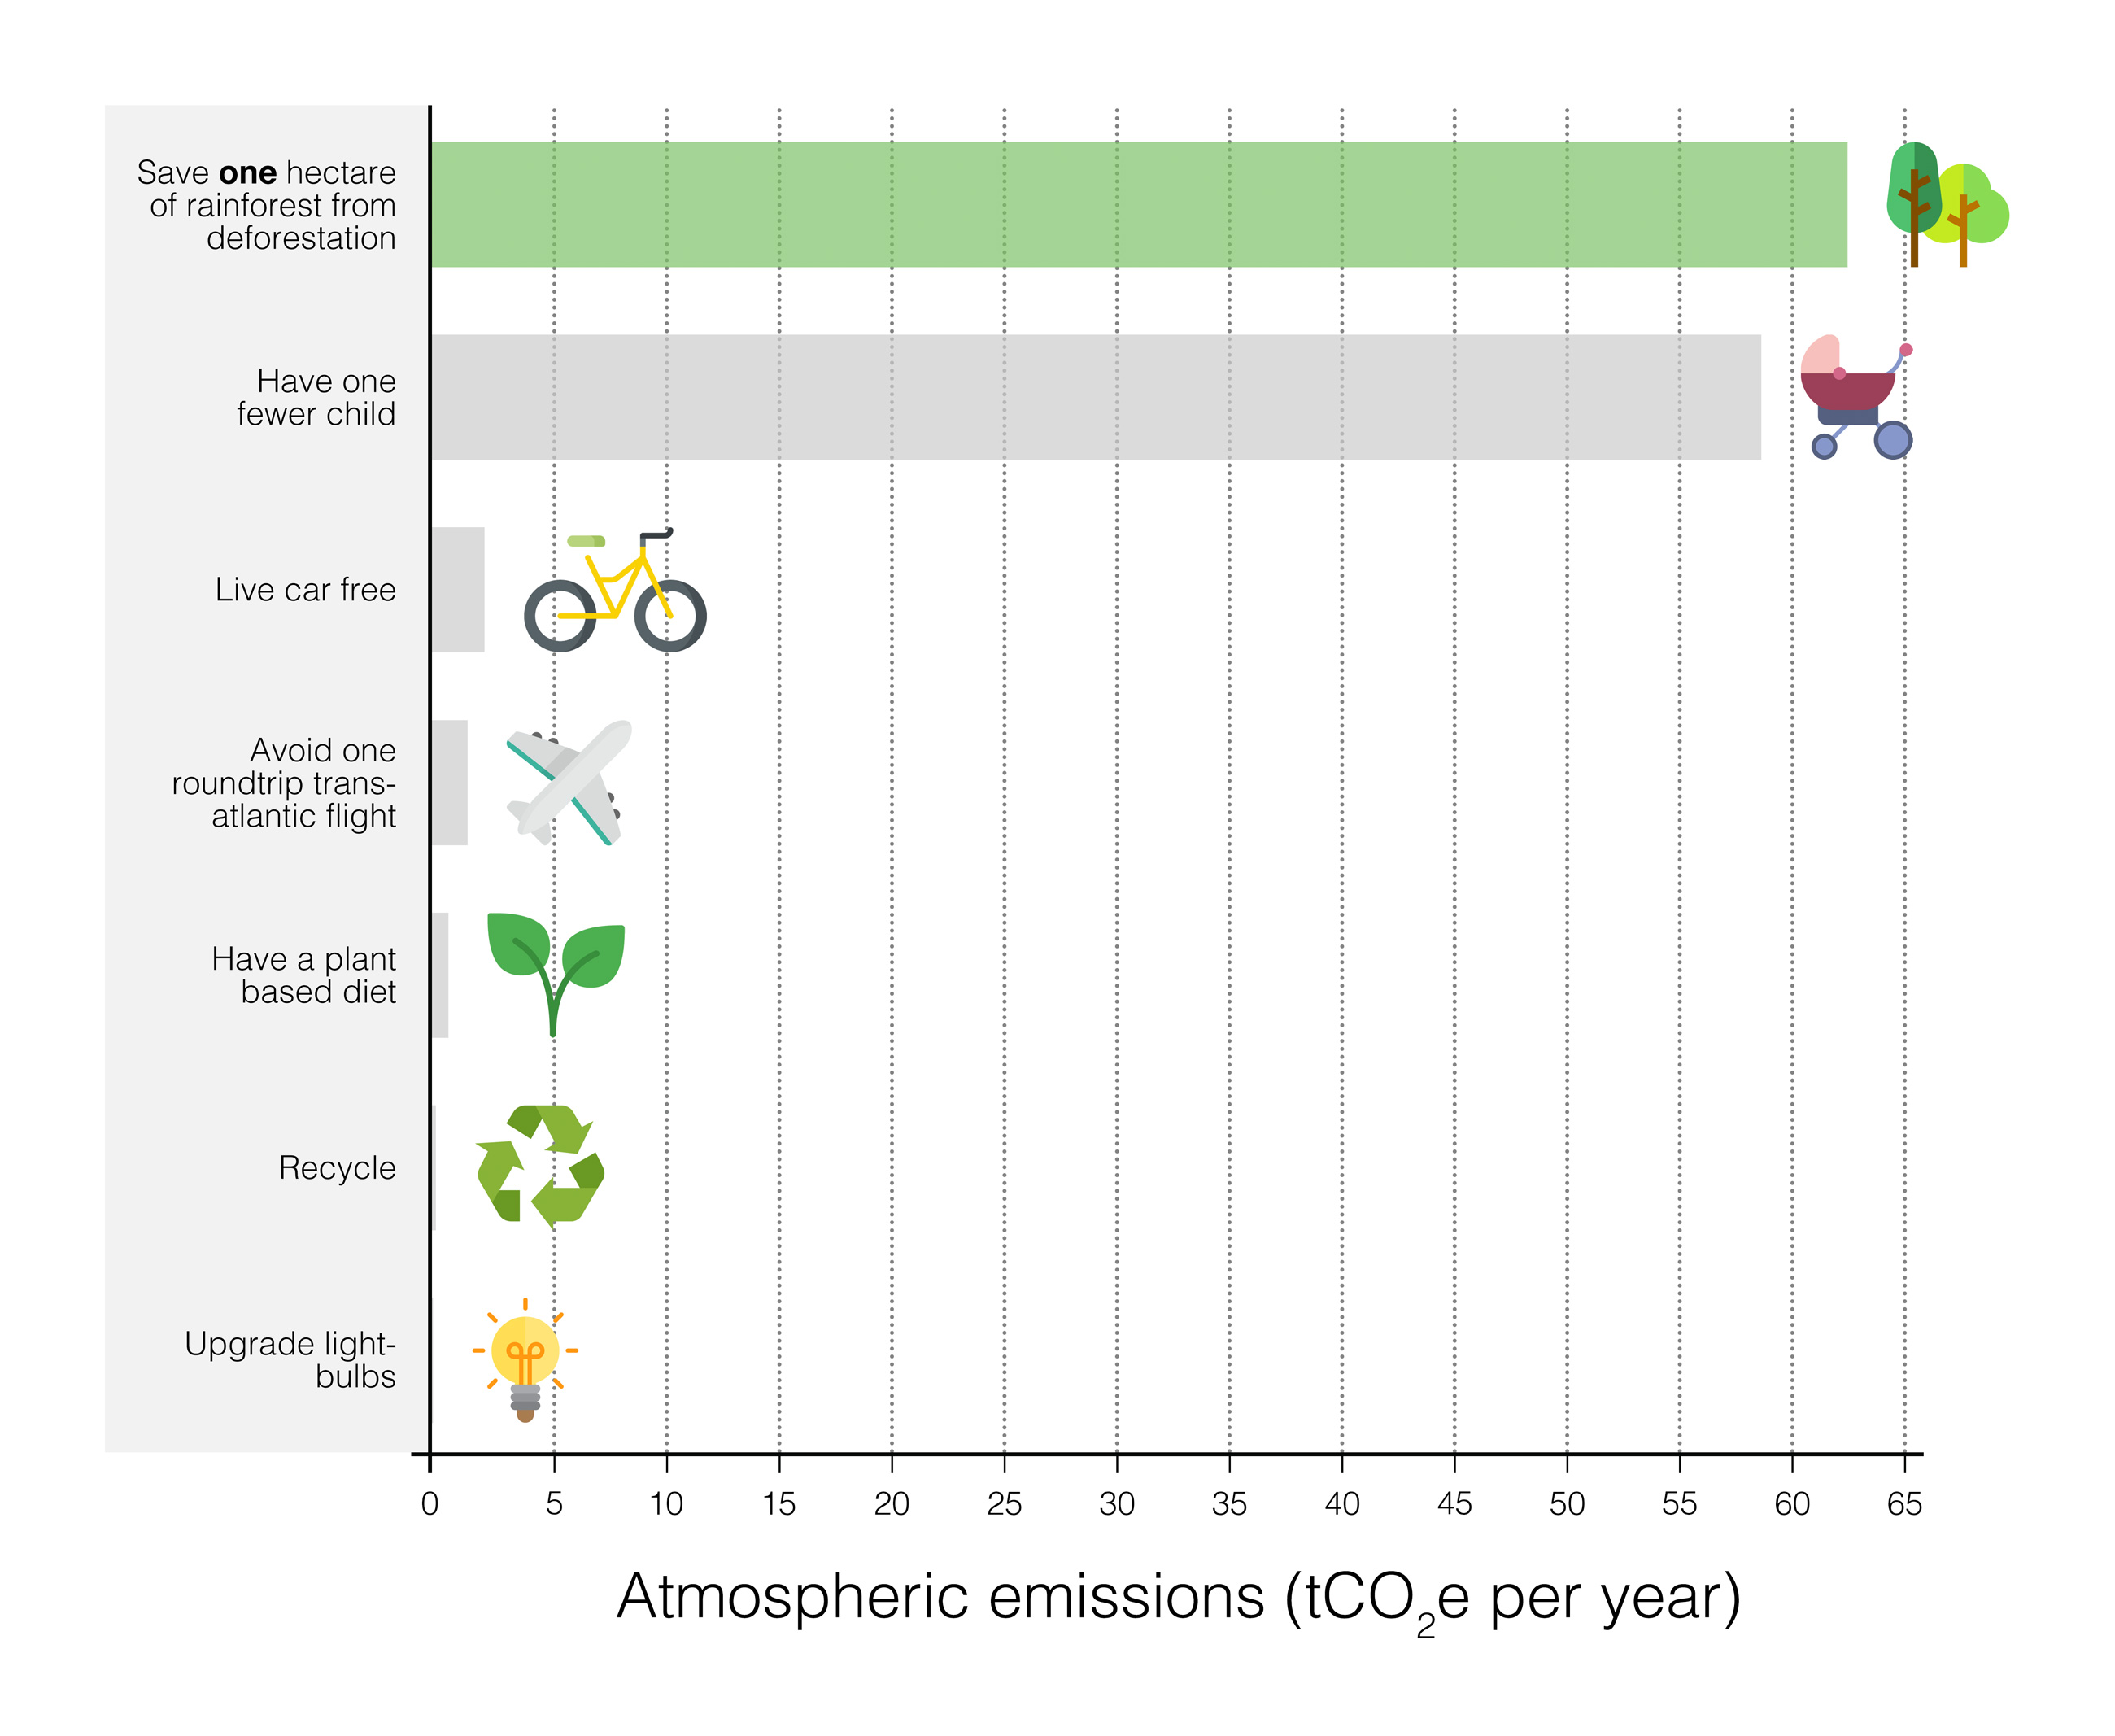 Reduction of atmospheric emissions from various individual actions